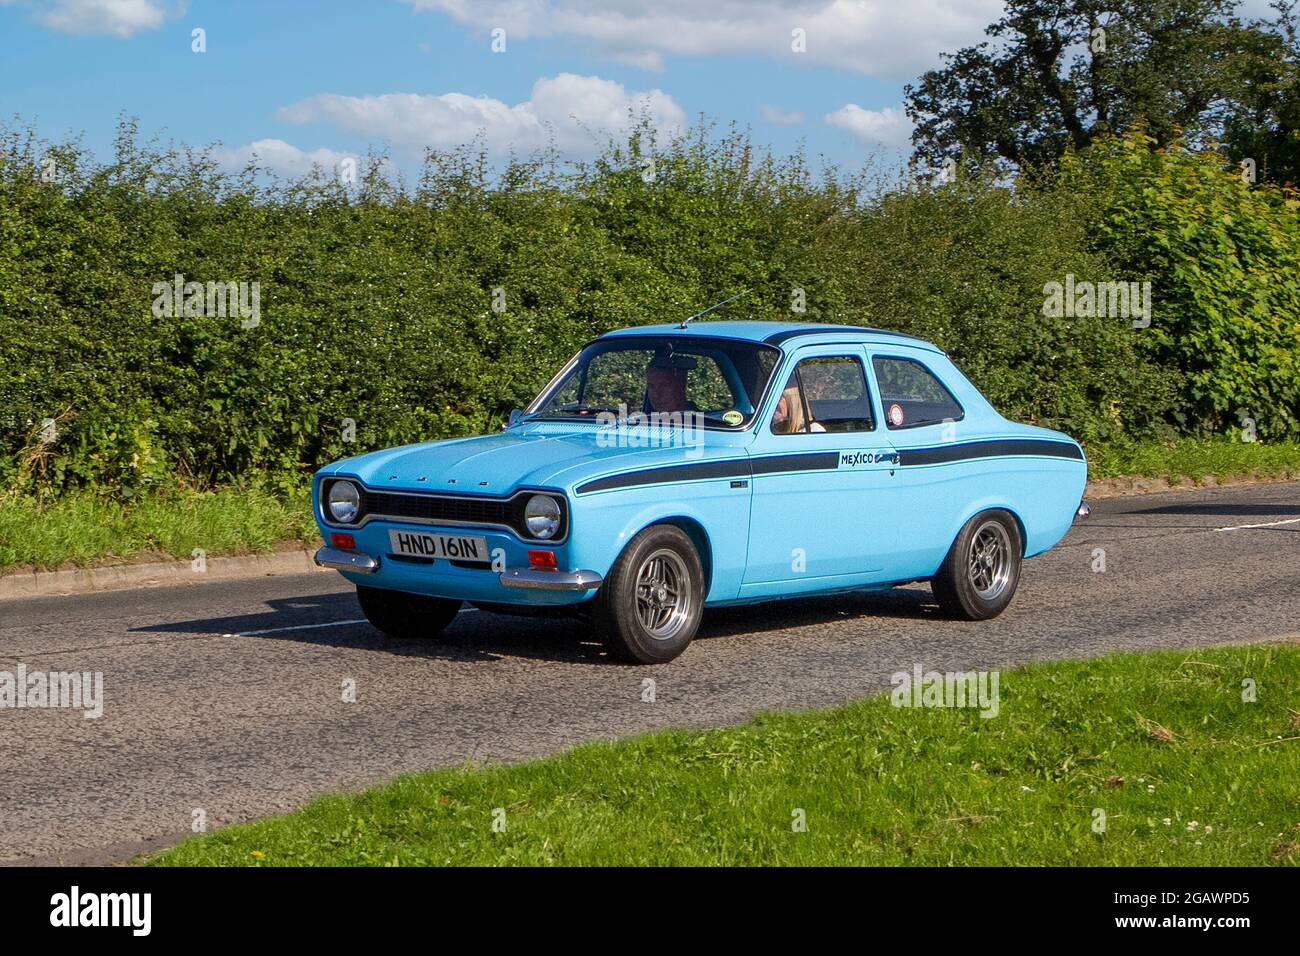 1975, 70s, 1970s, blue Ford Escort Mexico classic vintage car arriving at the Capesthorne Hall classic car show. Stock Photo